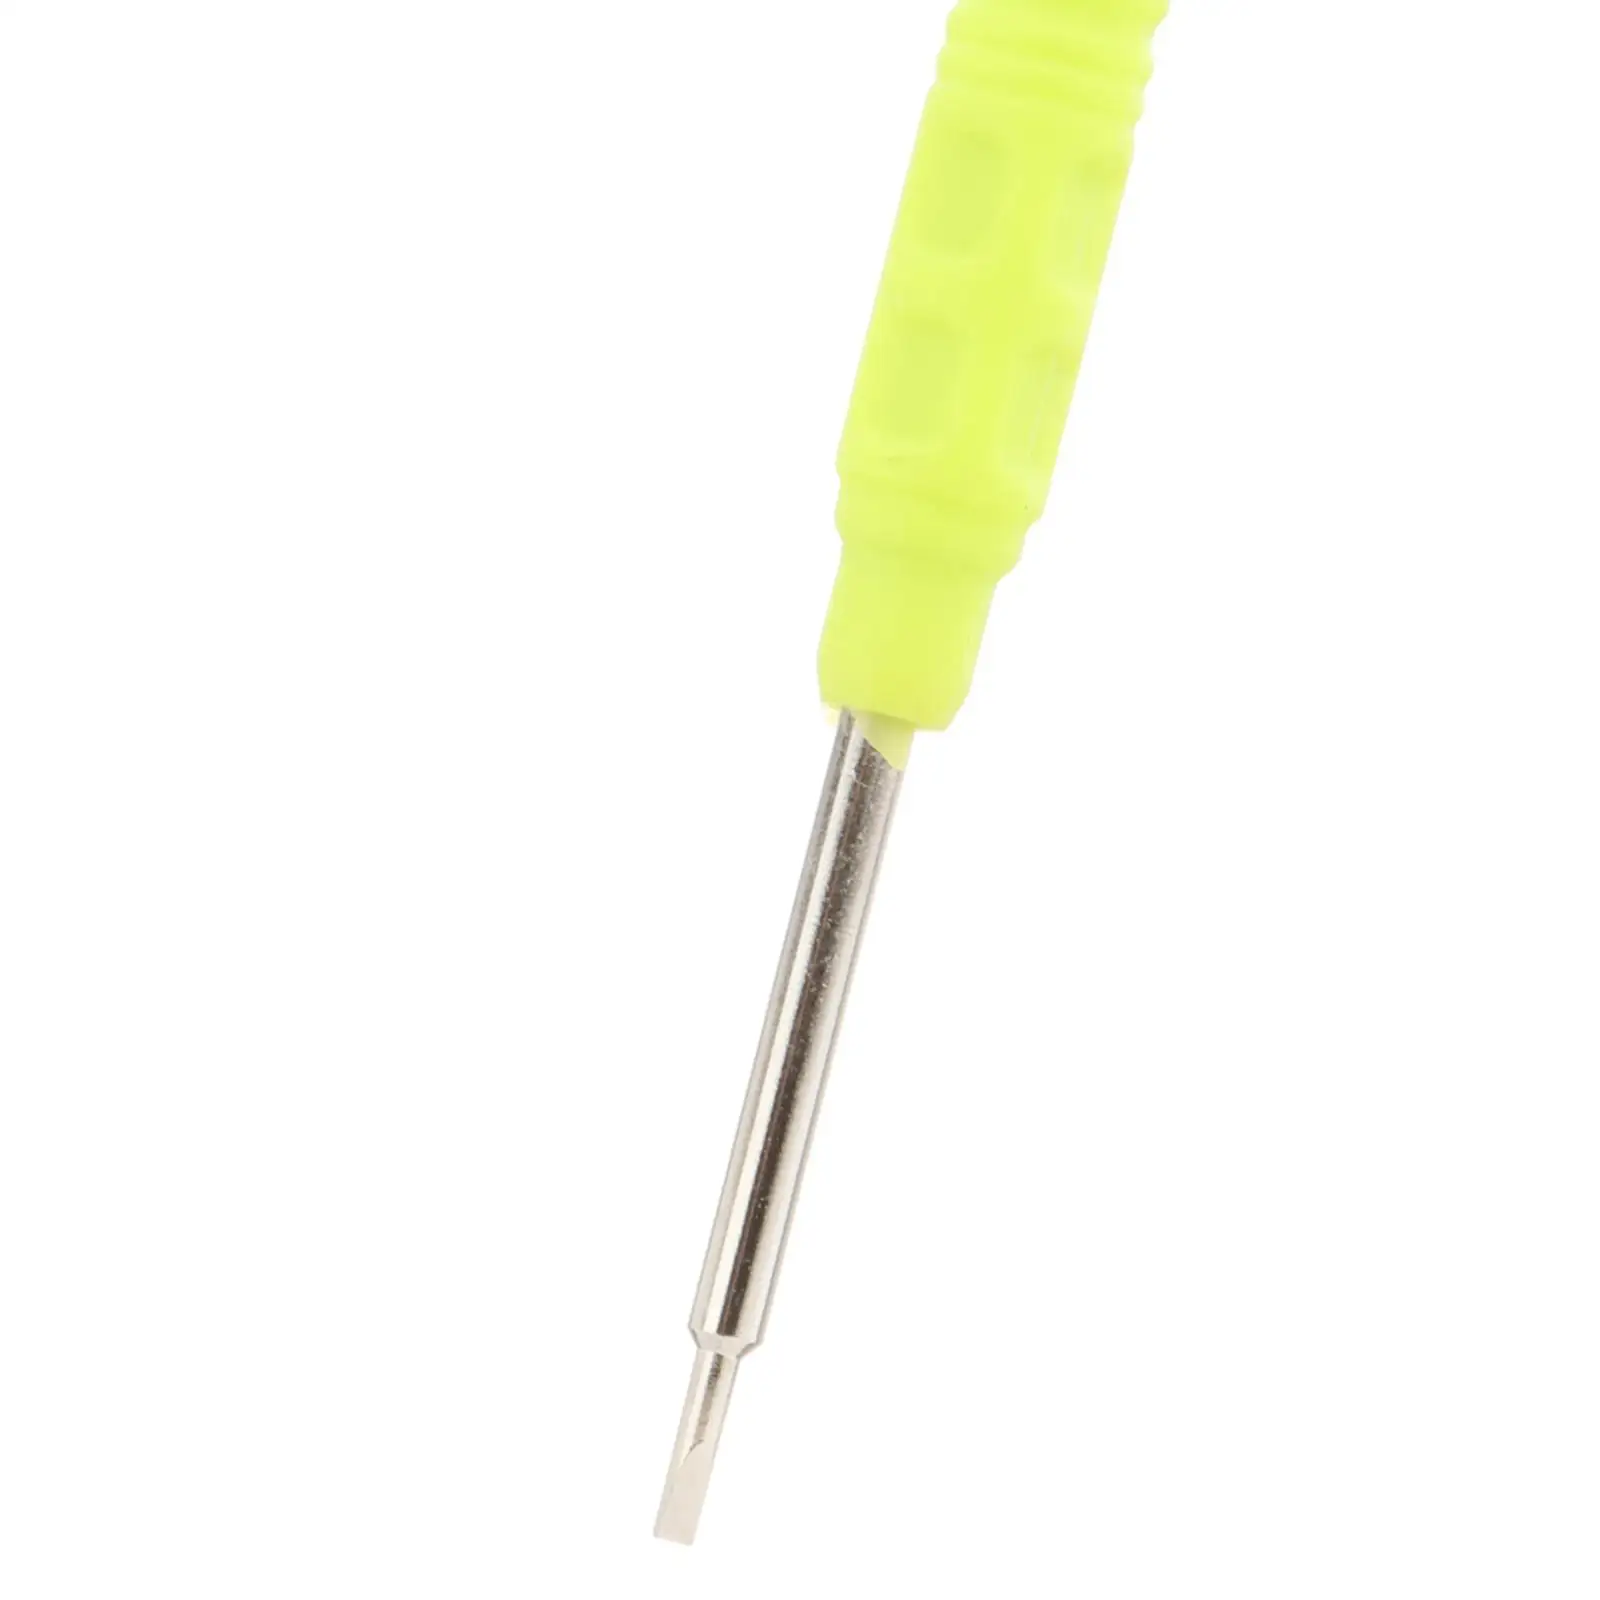 Epee Fencing Screwdriver Professional Hand Tool for Epee Foil